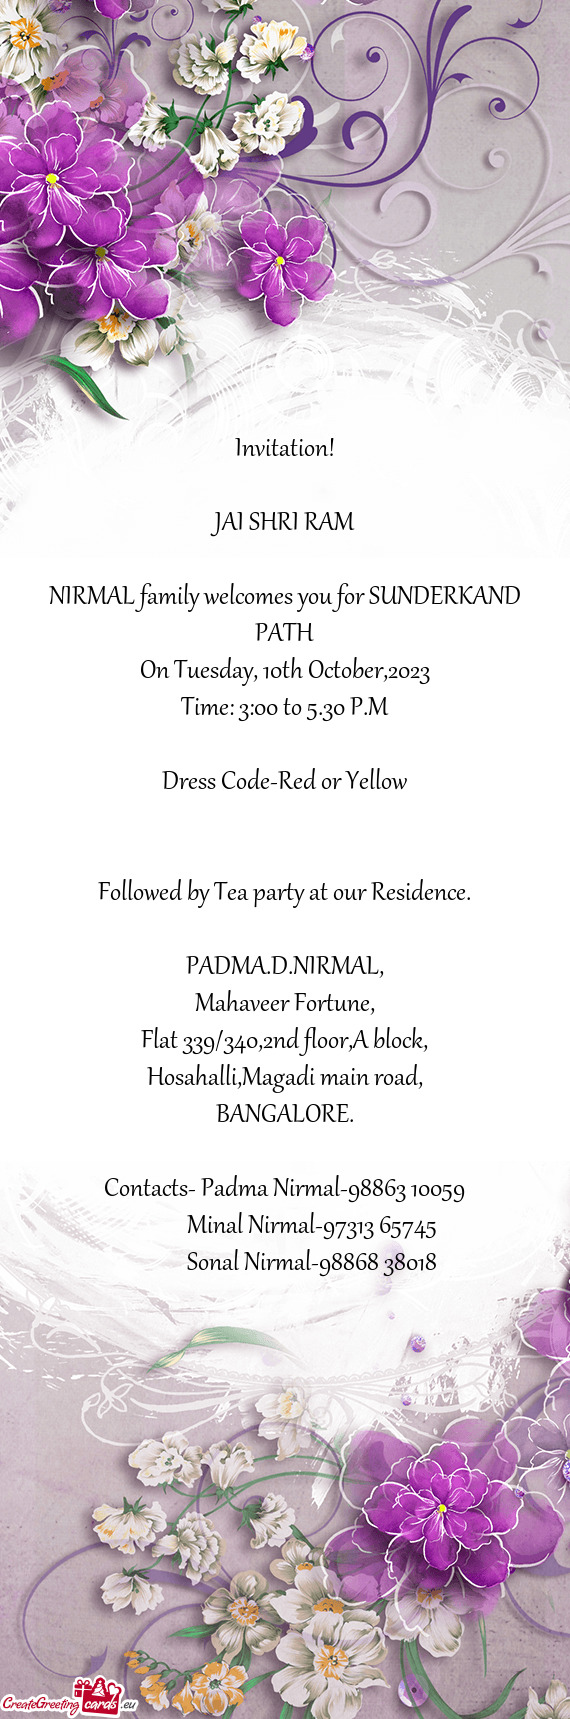 NIRMAL family welcomes you for SUNDERKAND PATH